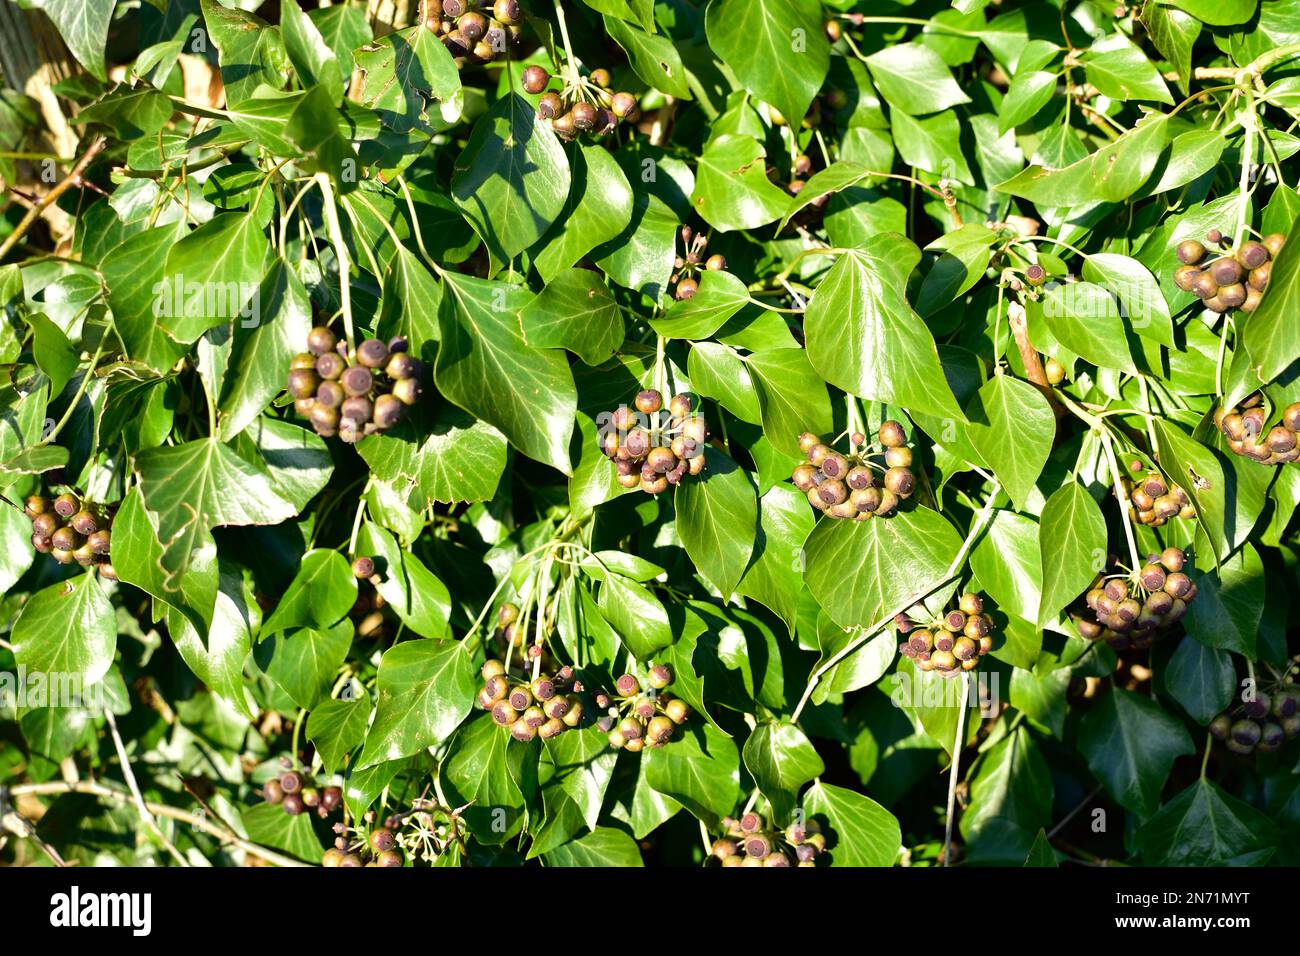 A clinging ivy, hedera helix, plant with bunches of berries hanging down Stock Photo